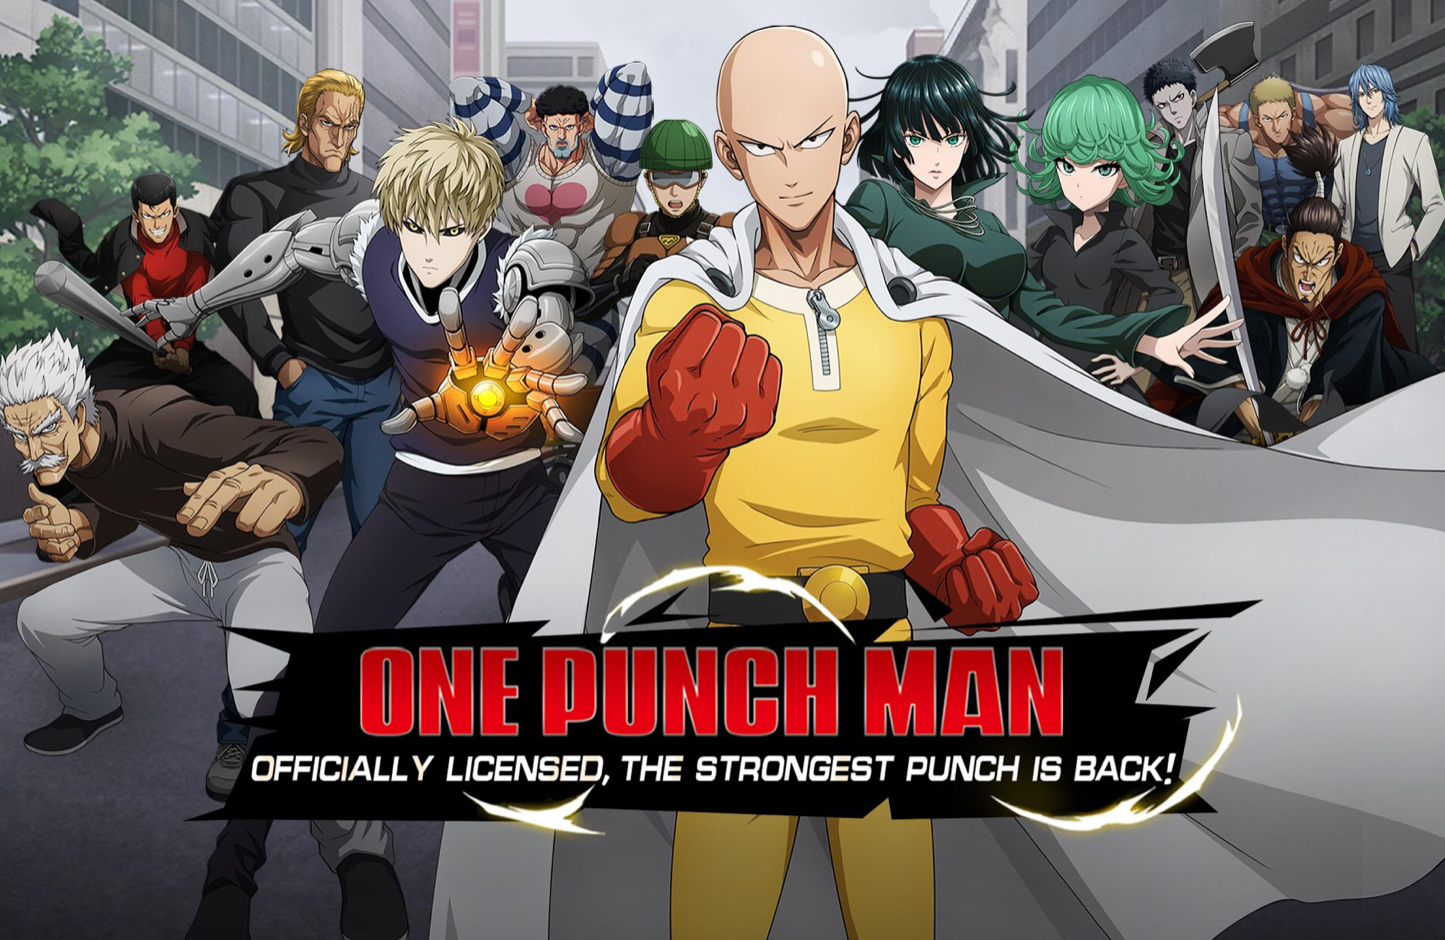 Road to Hero’ Is a New Card RPG from Oasis Games Based on the ‘One Punch Man’ Brand and It Has a Release Date with Pre-Registrations Now Live – TouchArcade